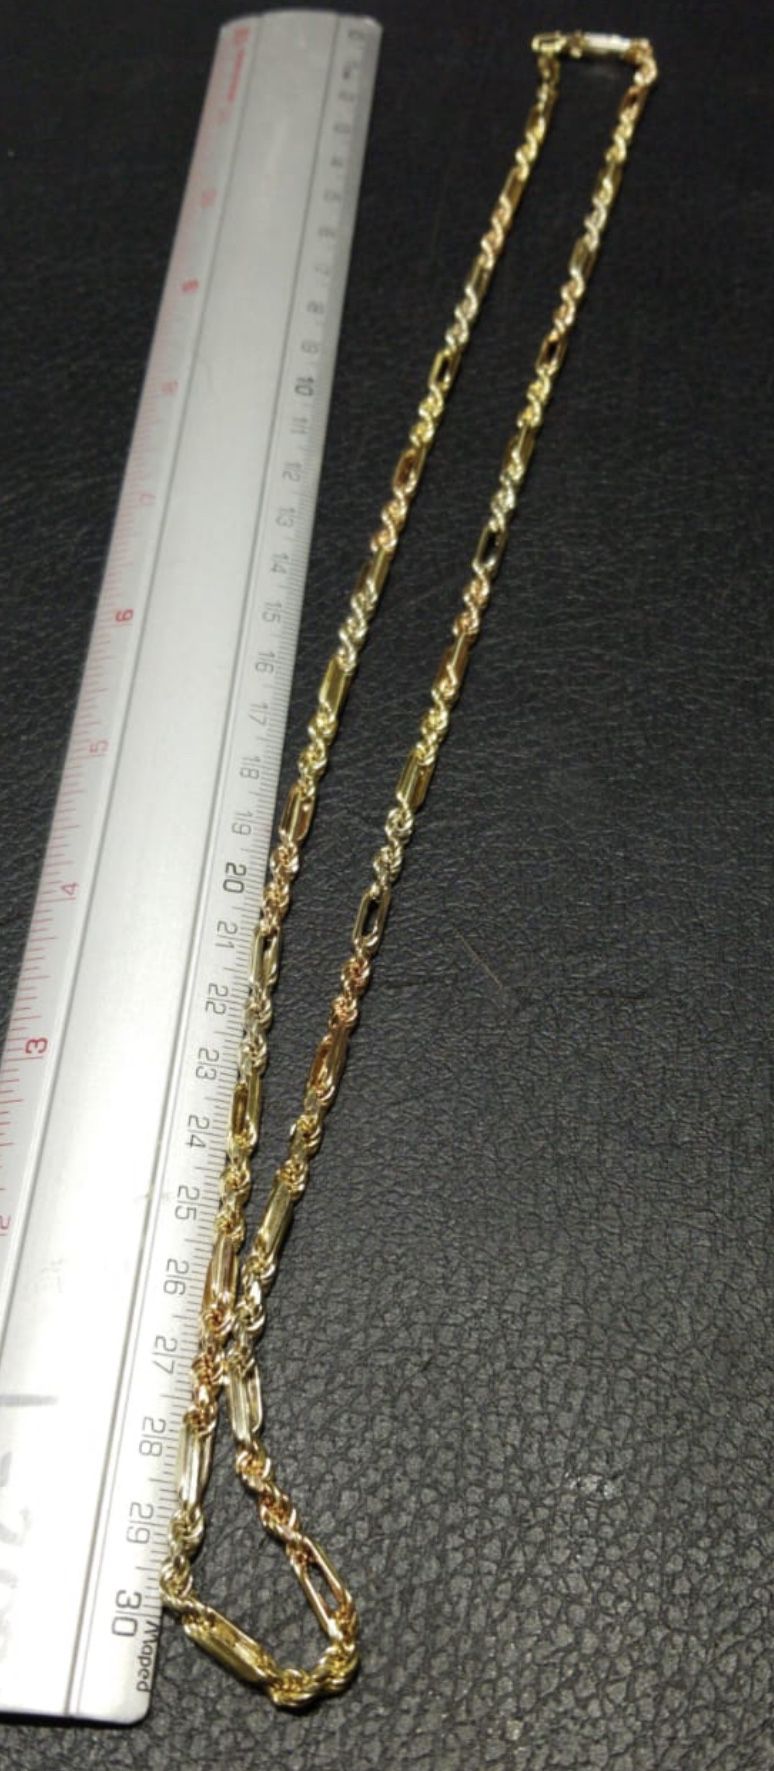   Gold Chain 14 K .  Gold Chain 14 k    18.3 Gramos 3 Colors 